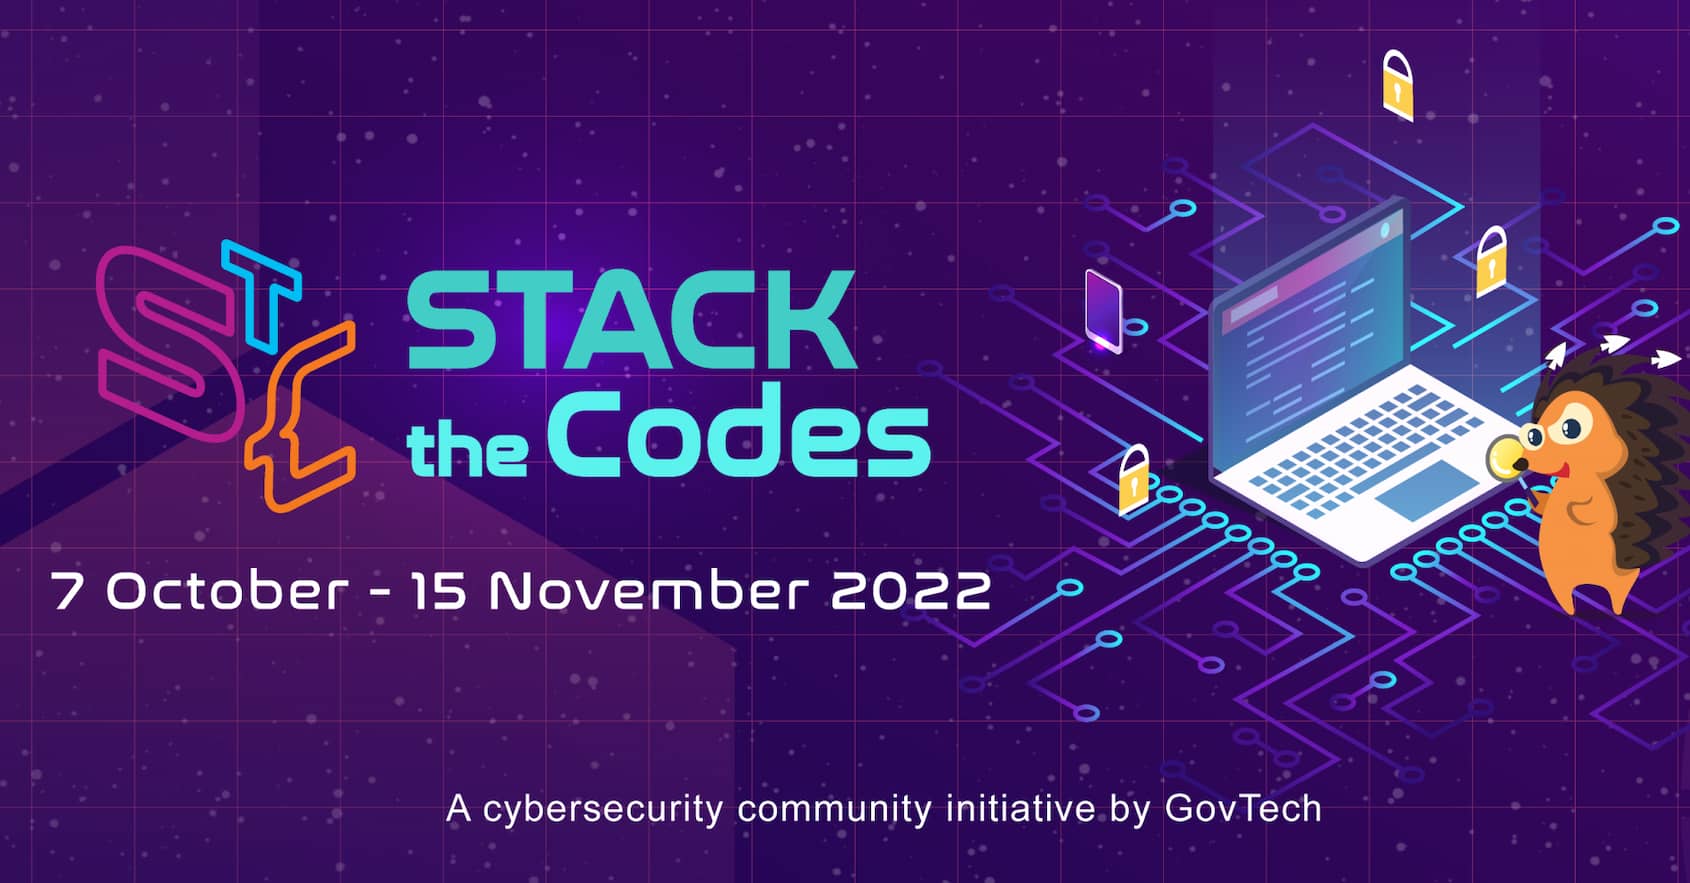 STACK the Codes event